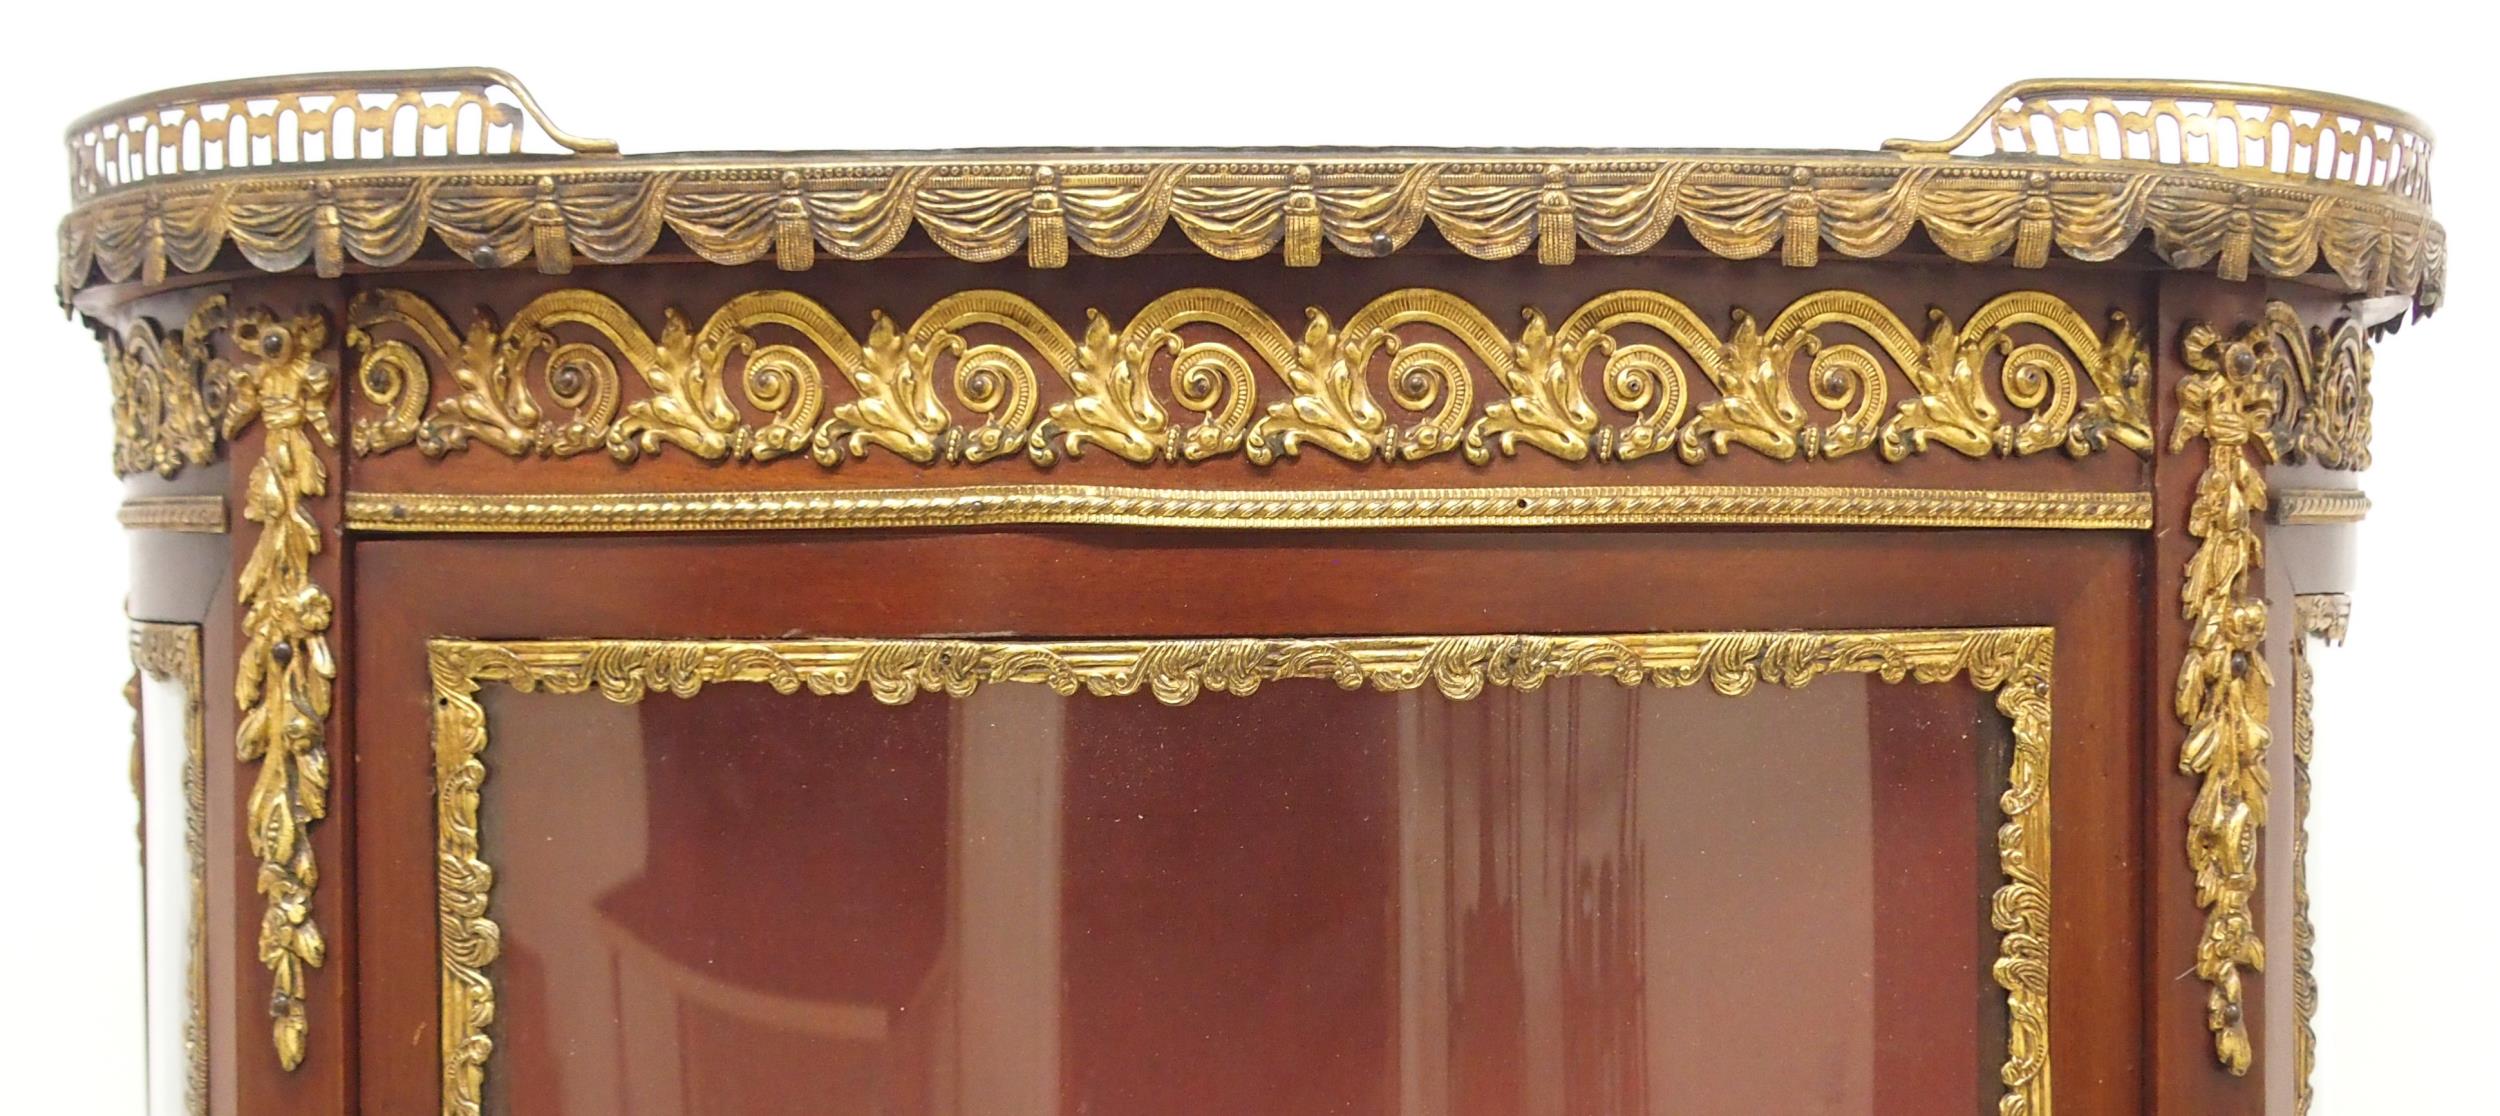 AN EARLY 20TH CENTURY LOUIS XV STYLE BRASS ORMOLU MOUNTED VITRINE DISPLAY CABINET  with galleried - Image 6 of 10